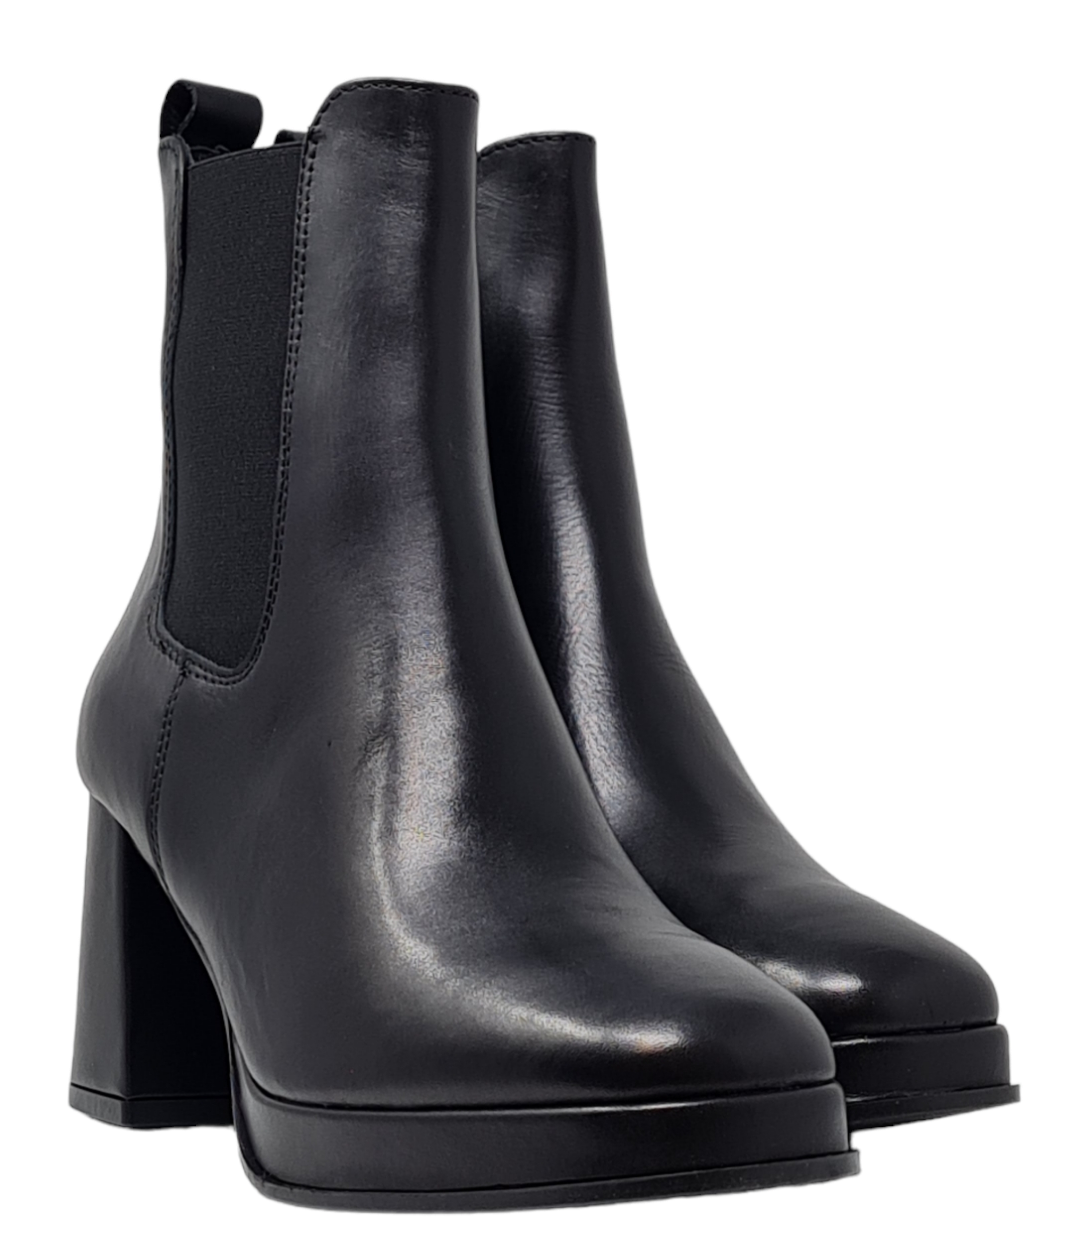 AT714 Women's Ankle Boot